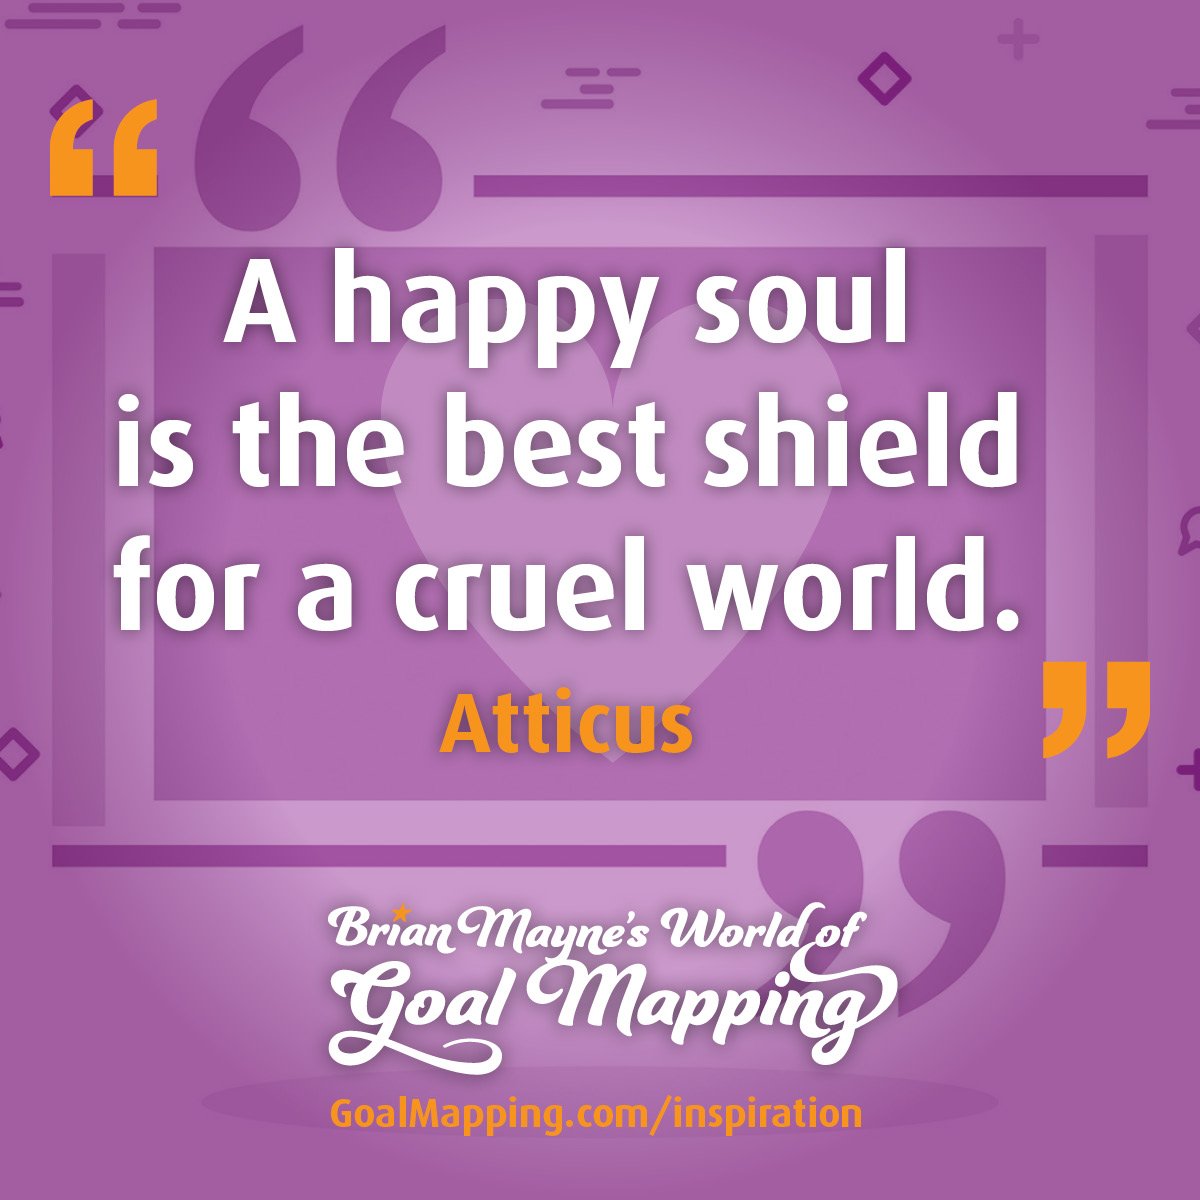 "A happy soul is the best shield for a cruel world." Atticus